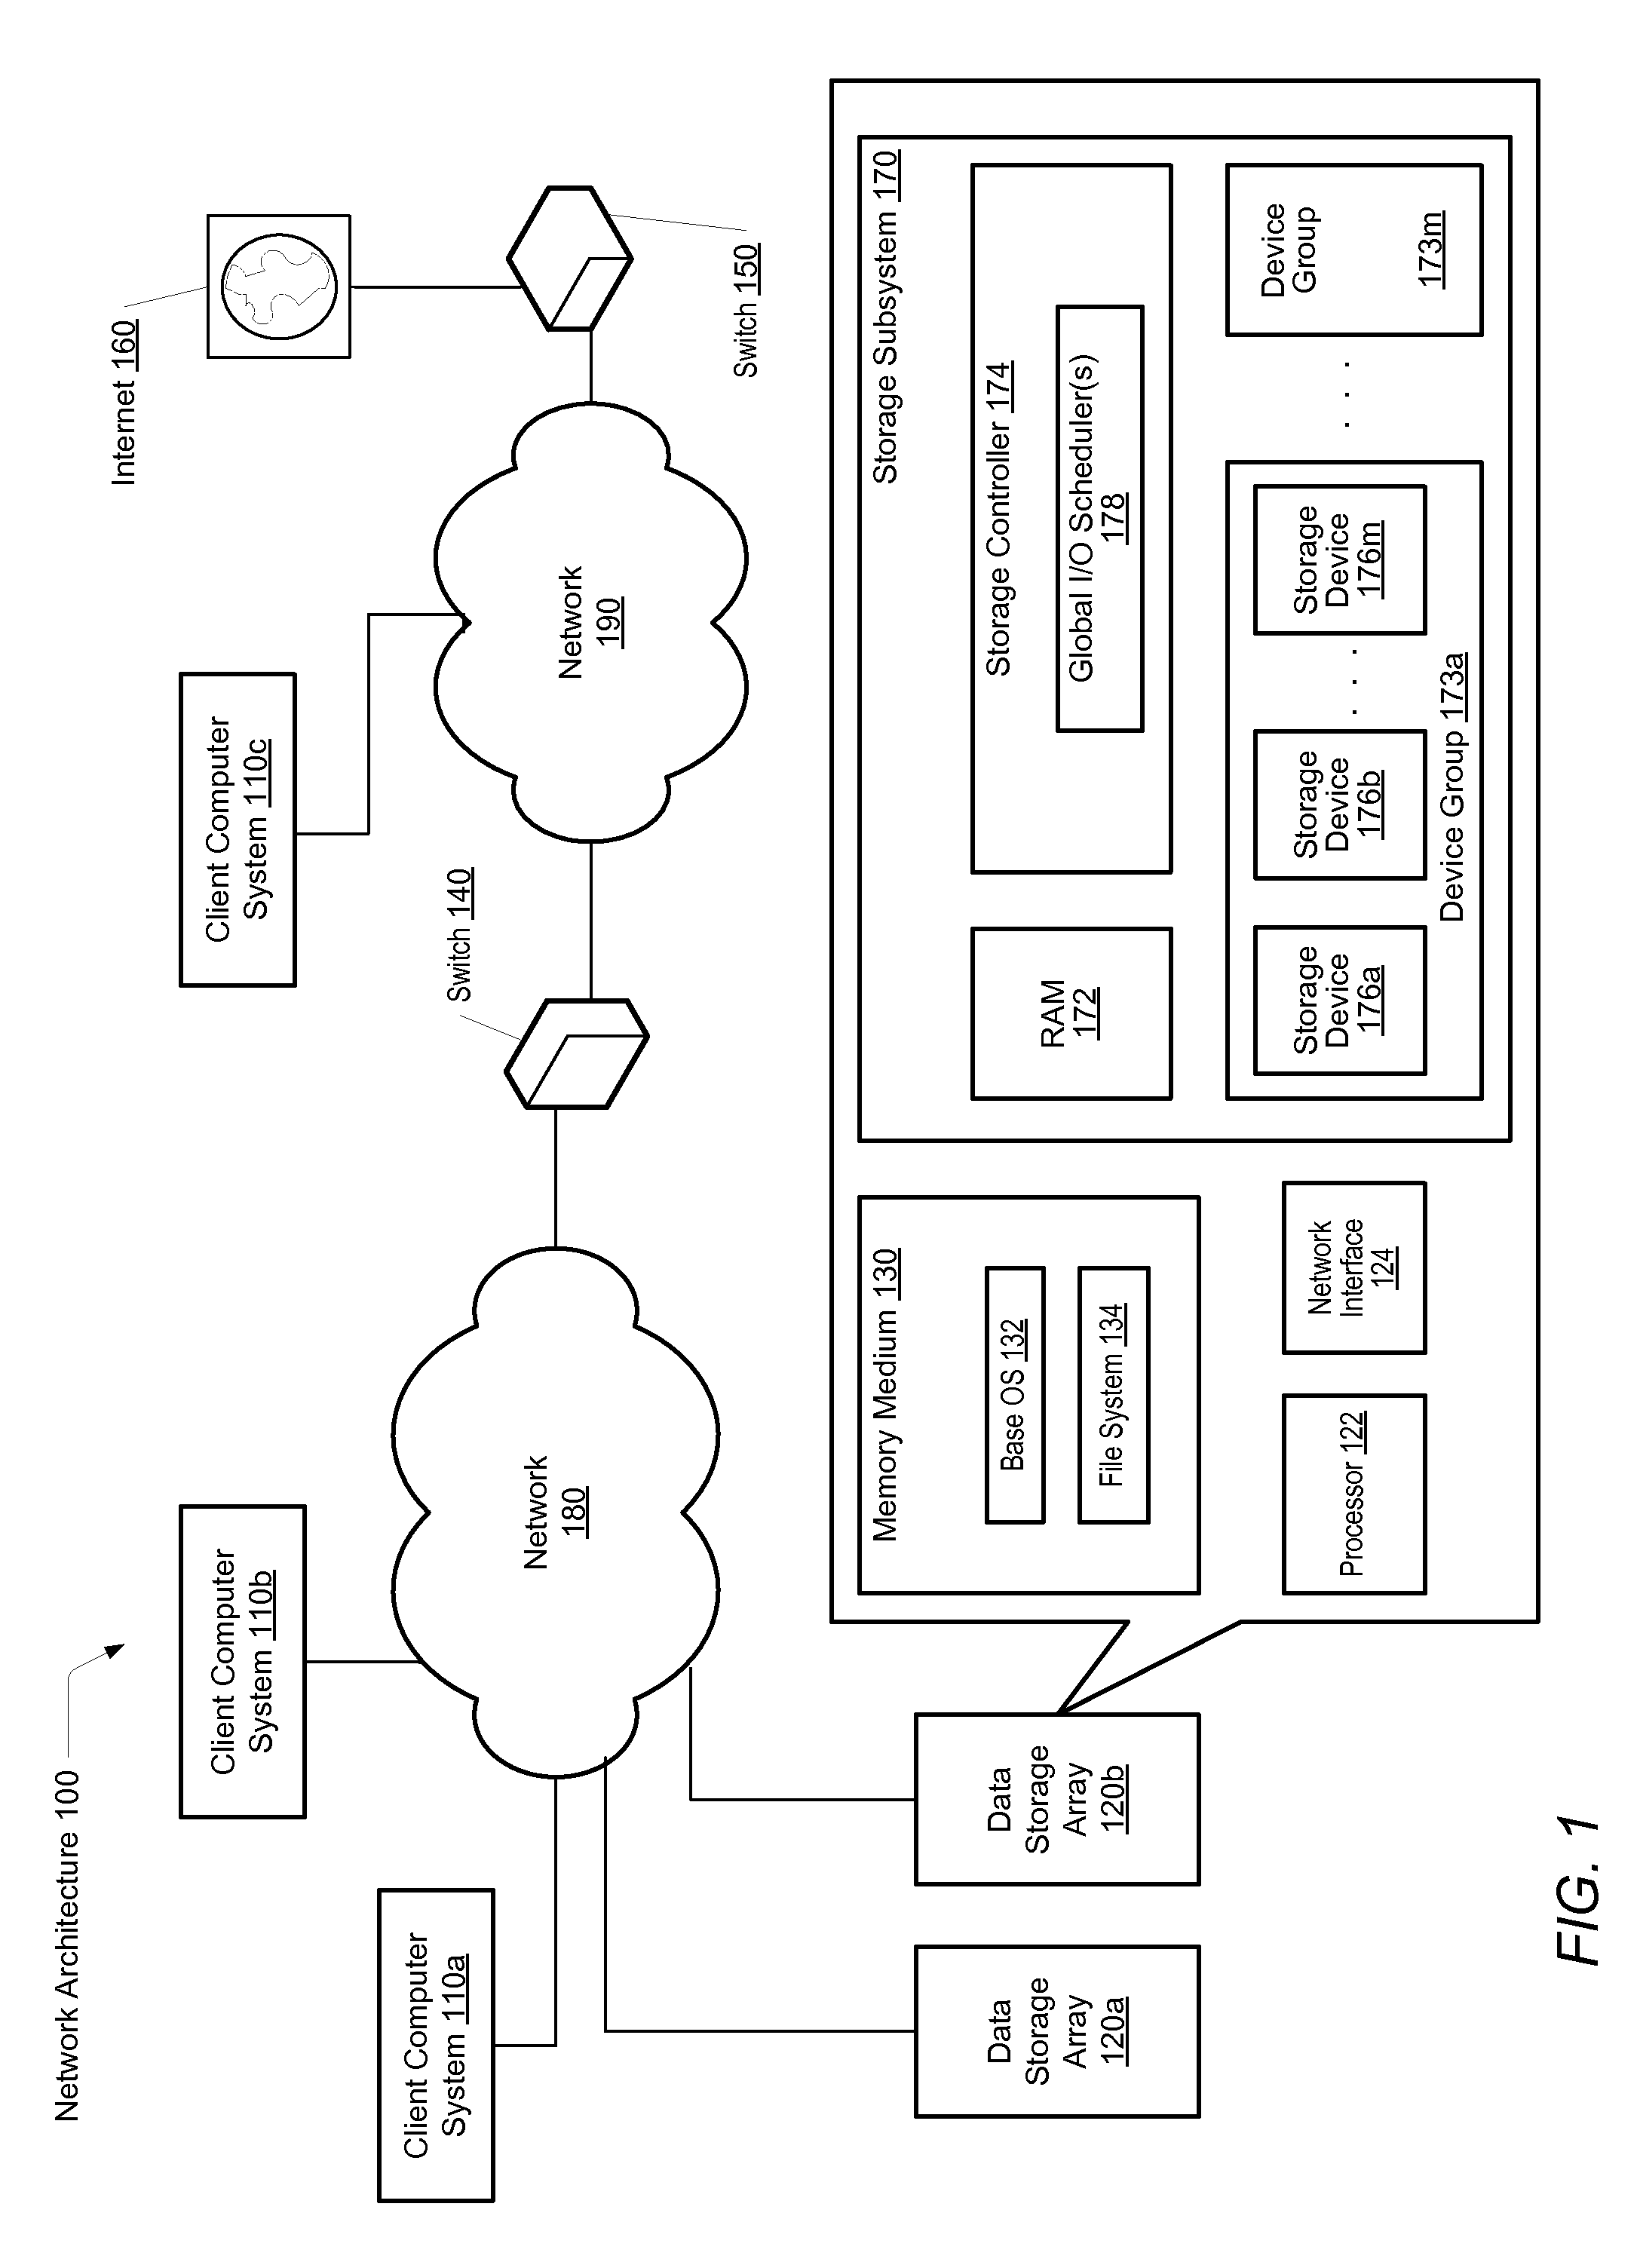 Scheduling of reconstructive I/O read operations in a storage environment